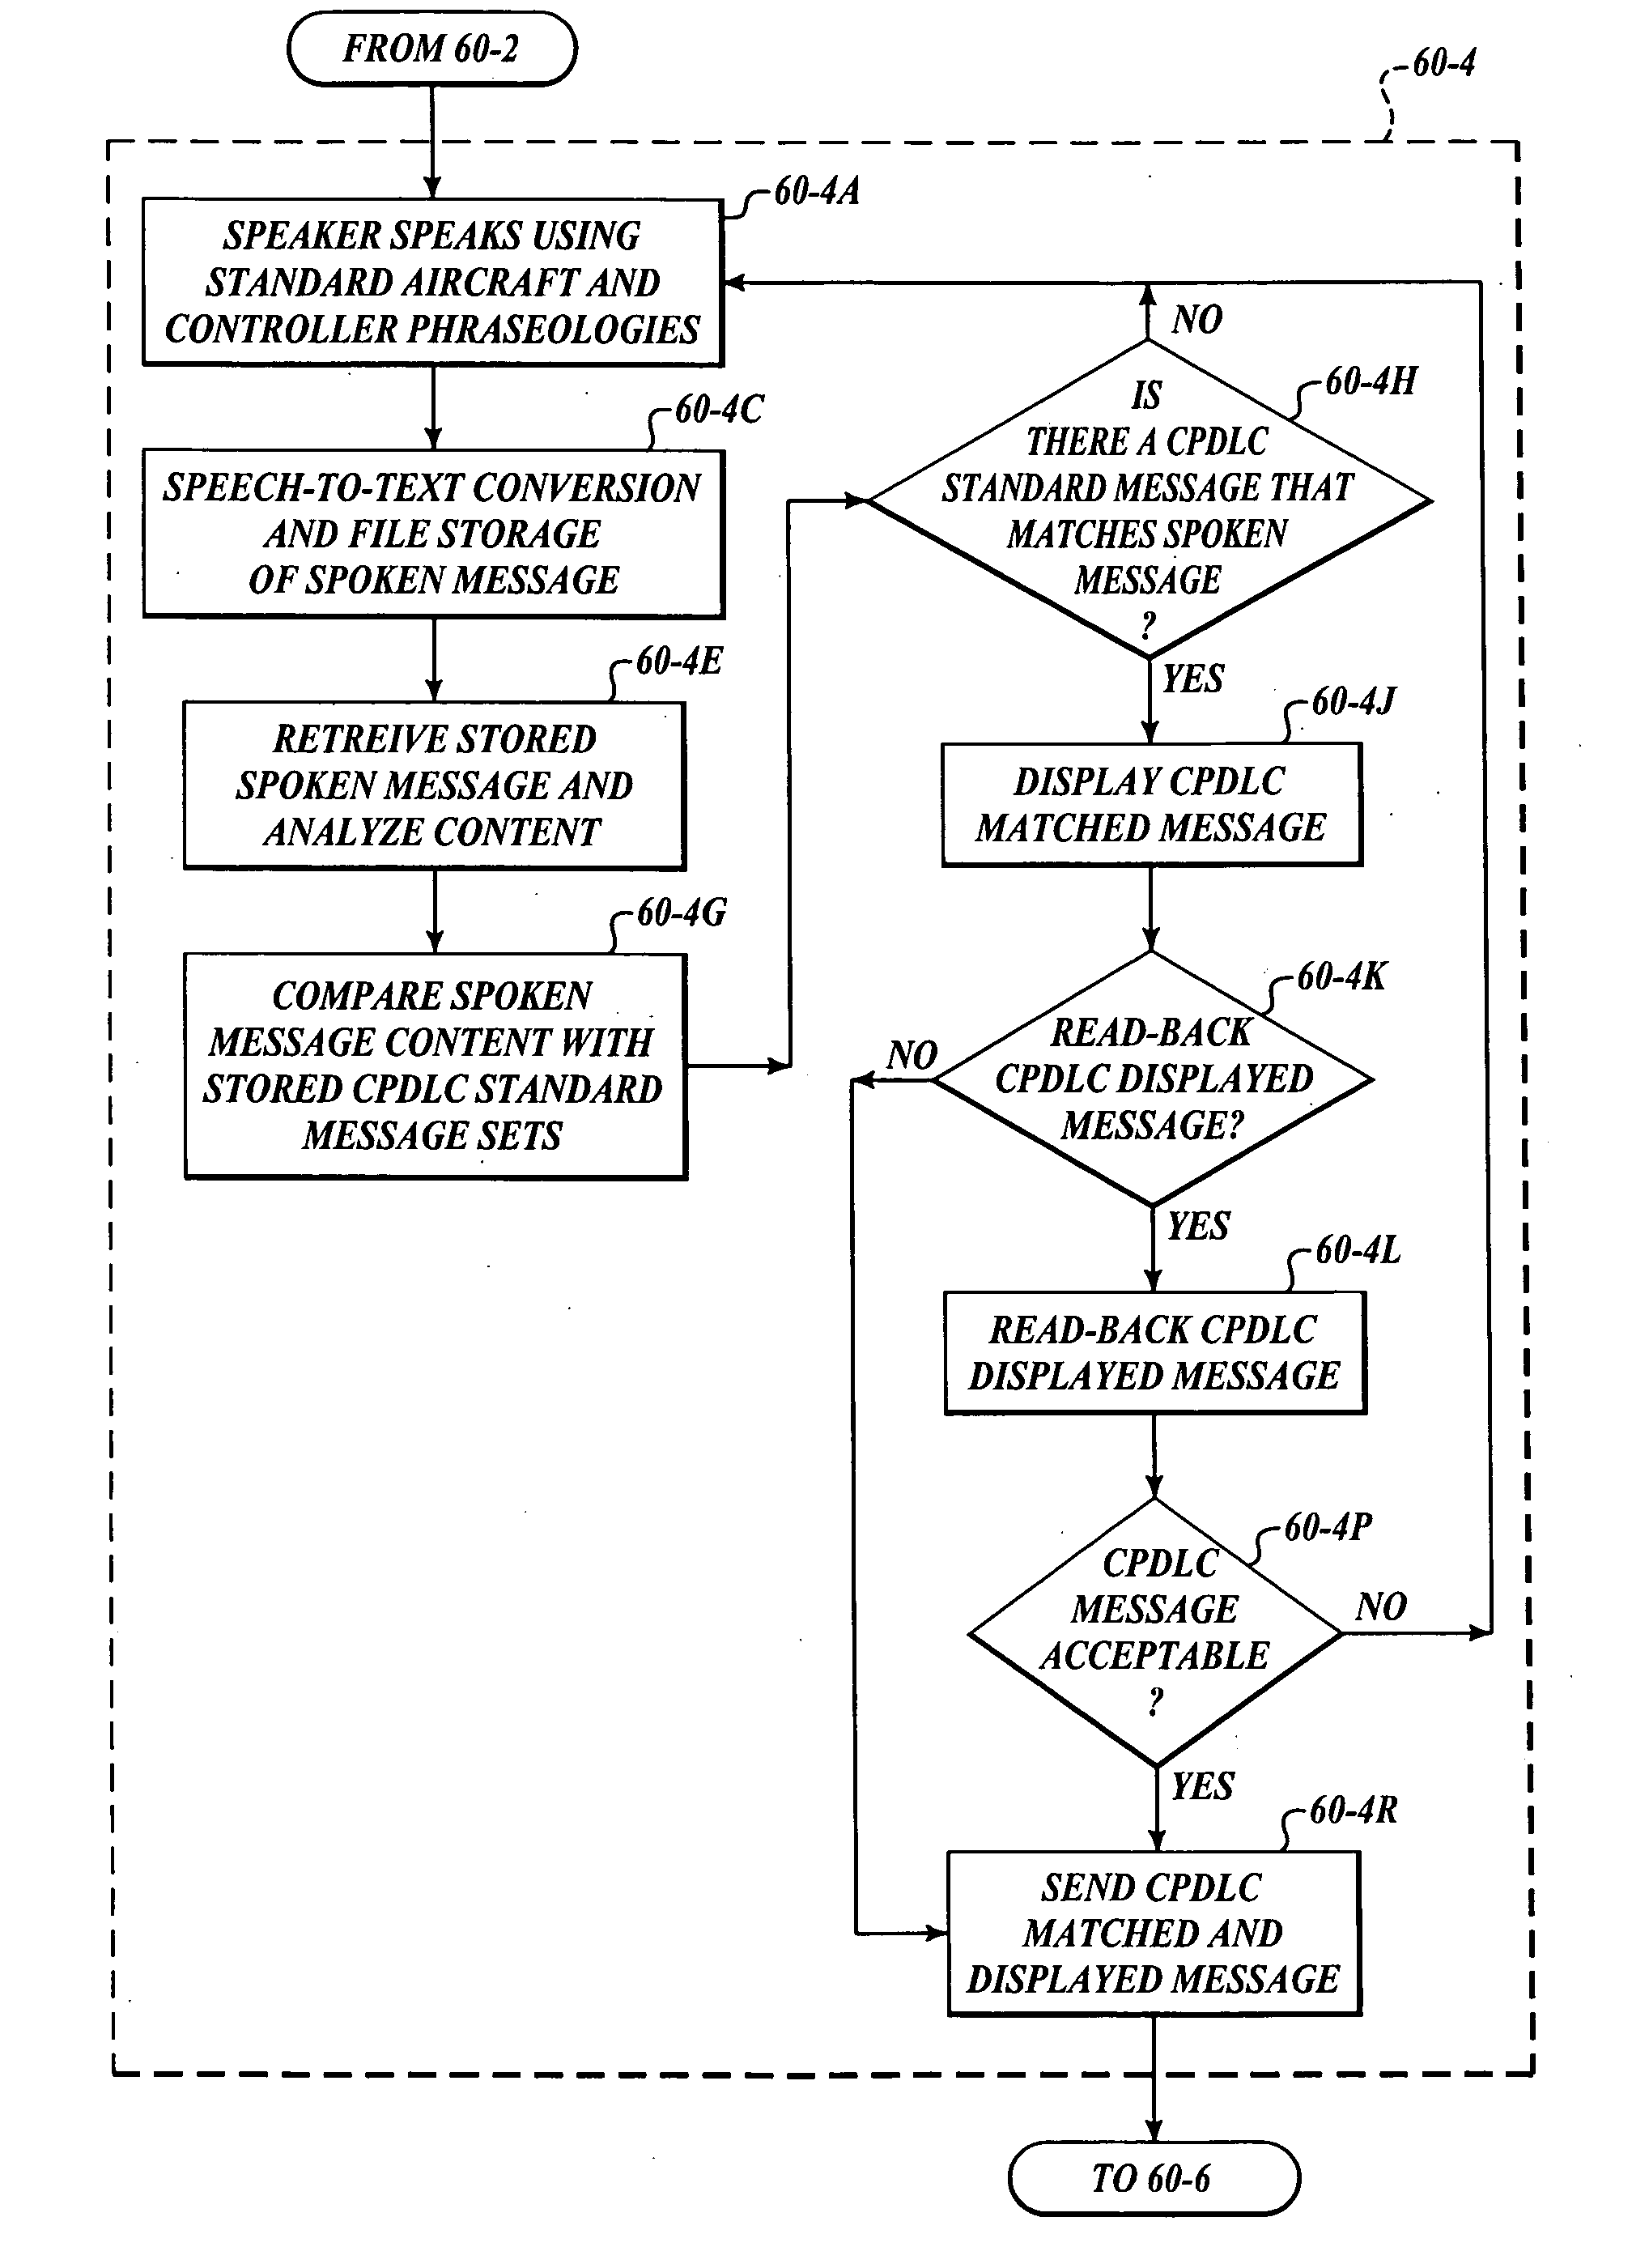 Enhanced system and method for air traffic control